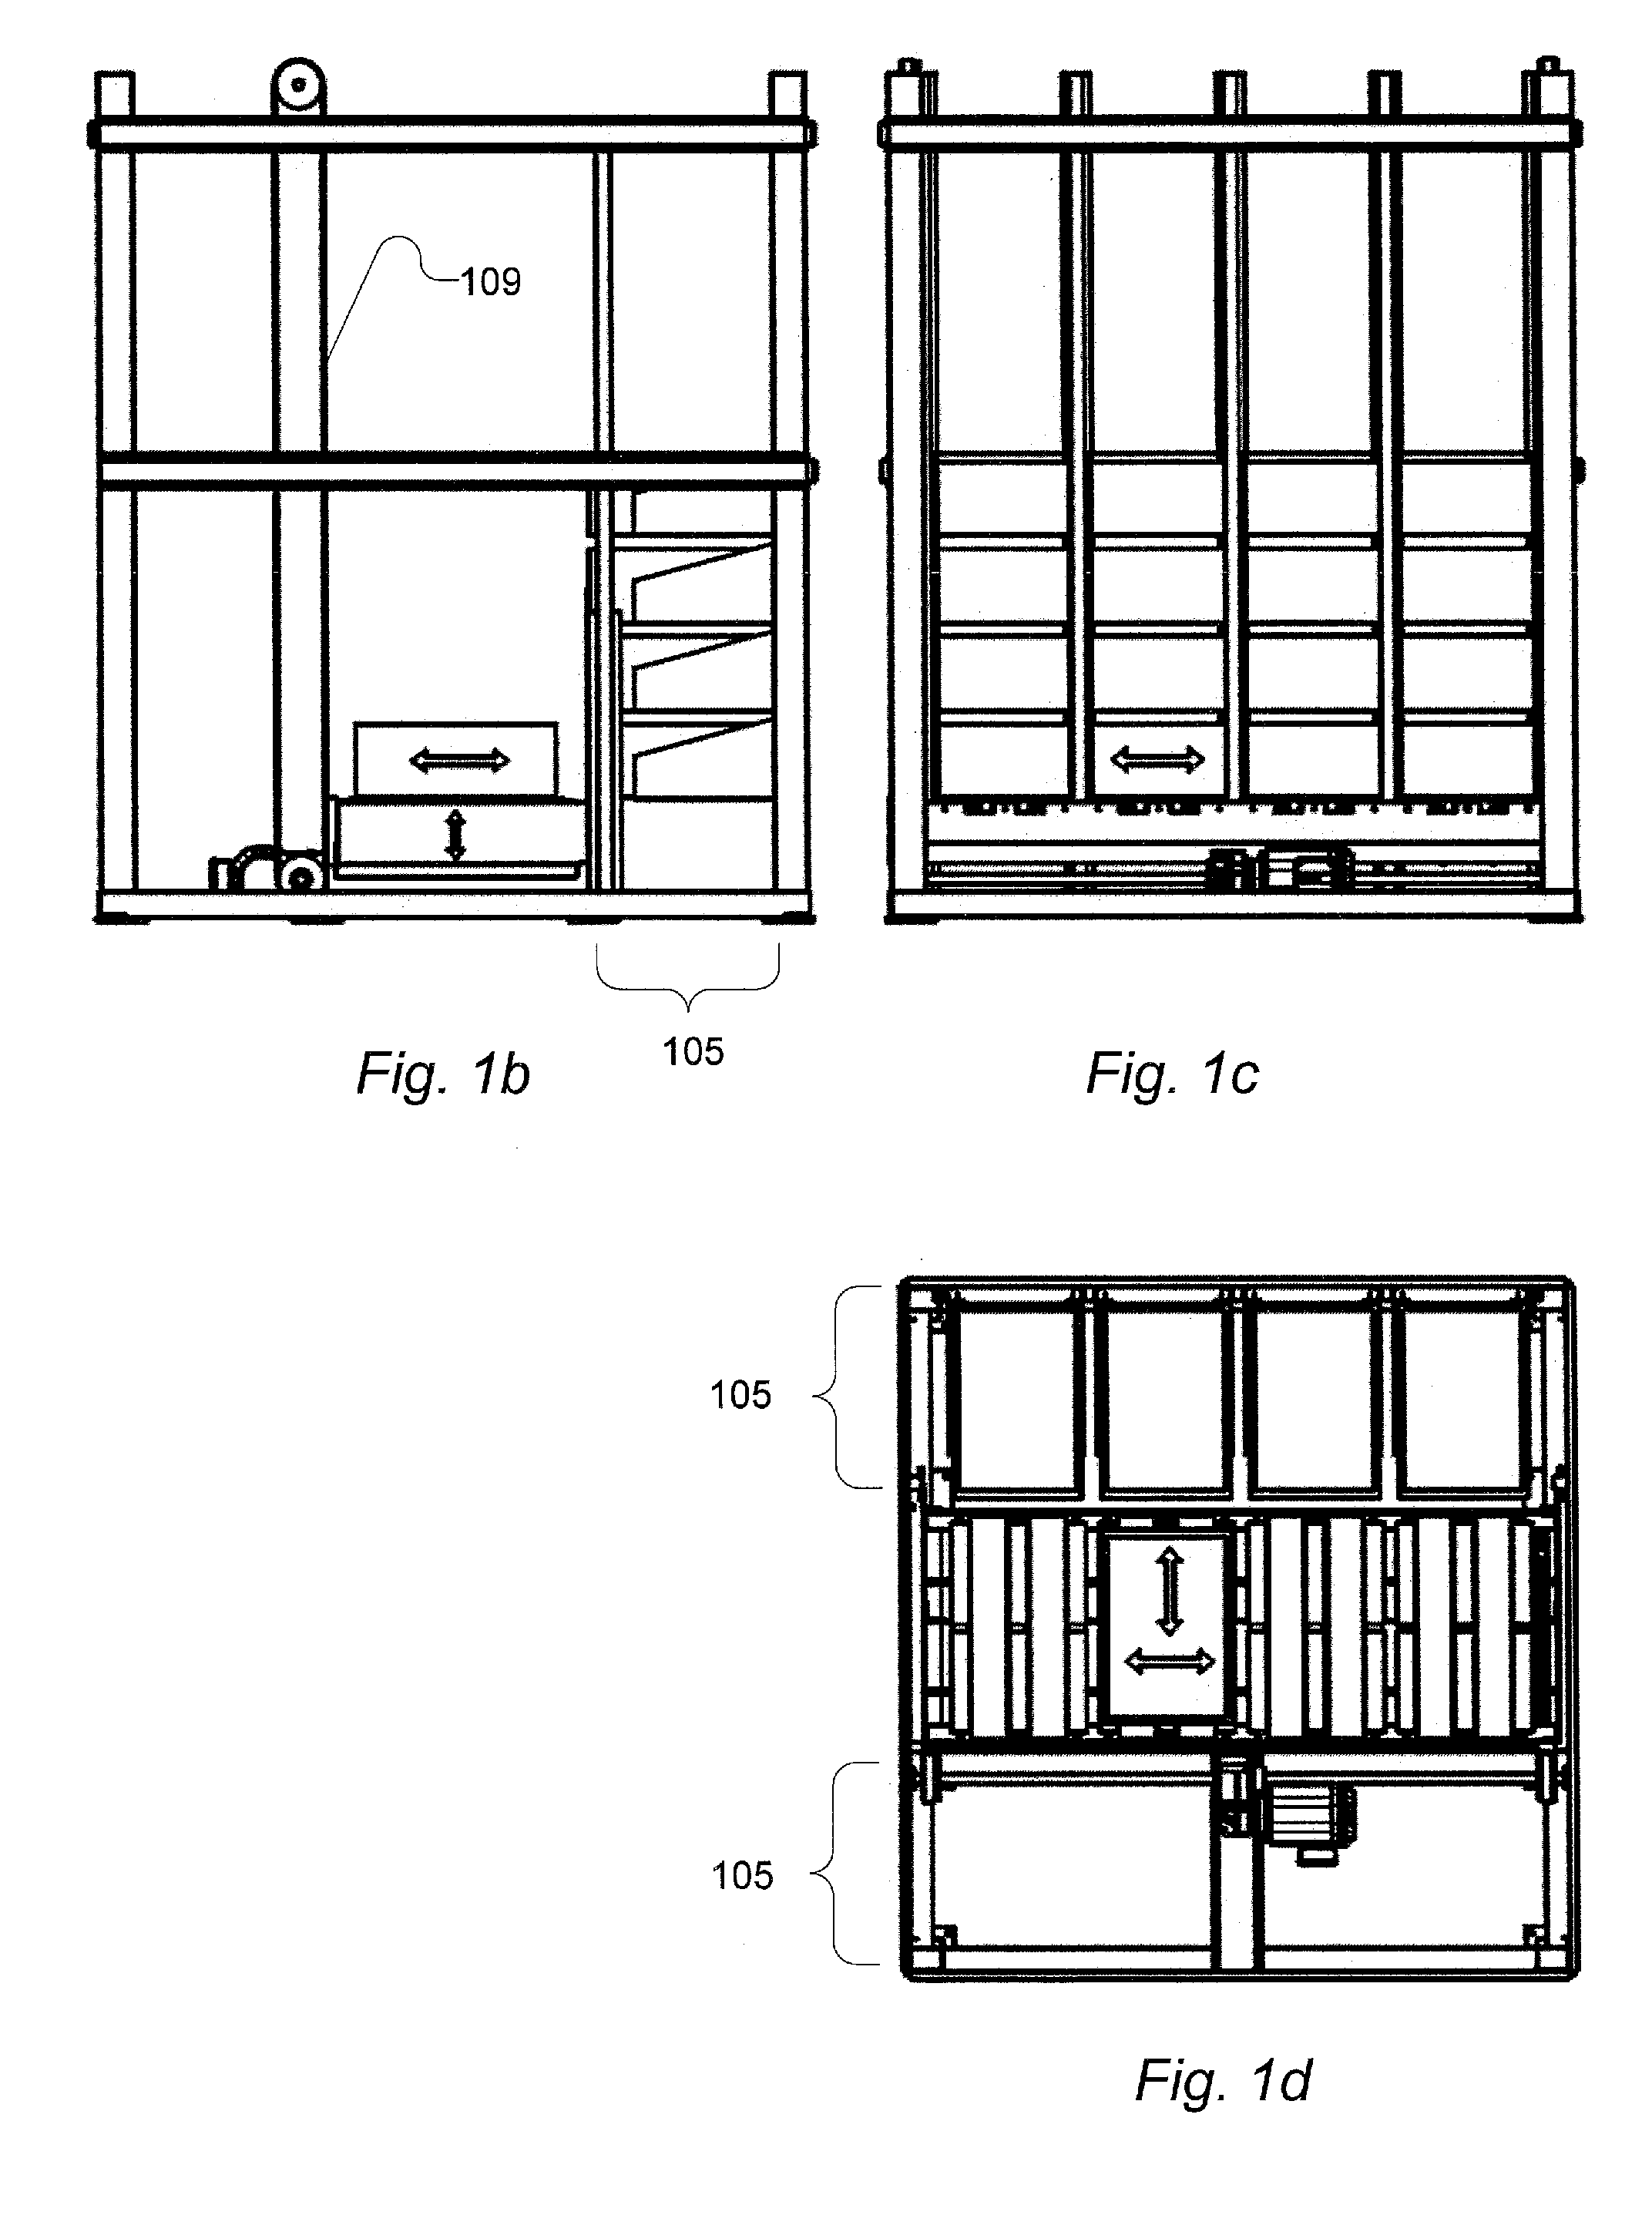 Vertical lift storage system and a method of operating a lift